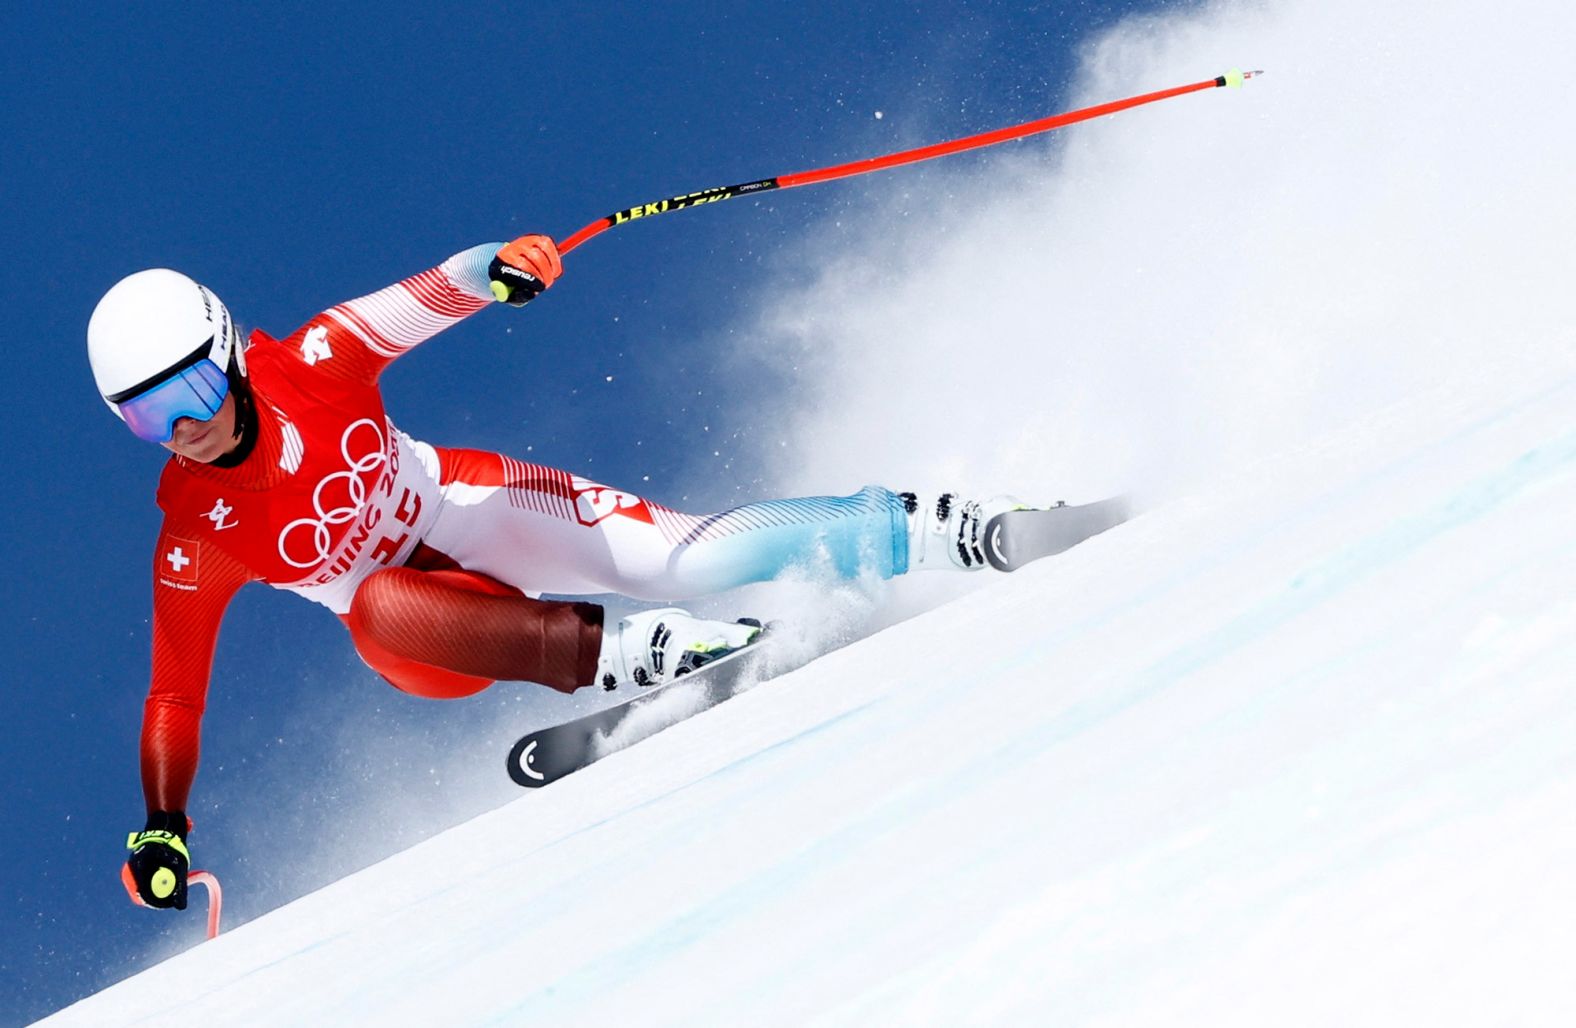 Switzerland's Corinne Suter skis in the downhill event on February 15. <a href="index.php?page=&url=https%3A%2F%2Fwww.cnn.com%2Fworld%2Flive-news%2Fbeijing-winter-olympics-02-15-22-spt%2Fh_97e4598e4ff8a9f1b36d9cac13f21737" target="_blank">She won the gold.</a>